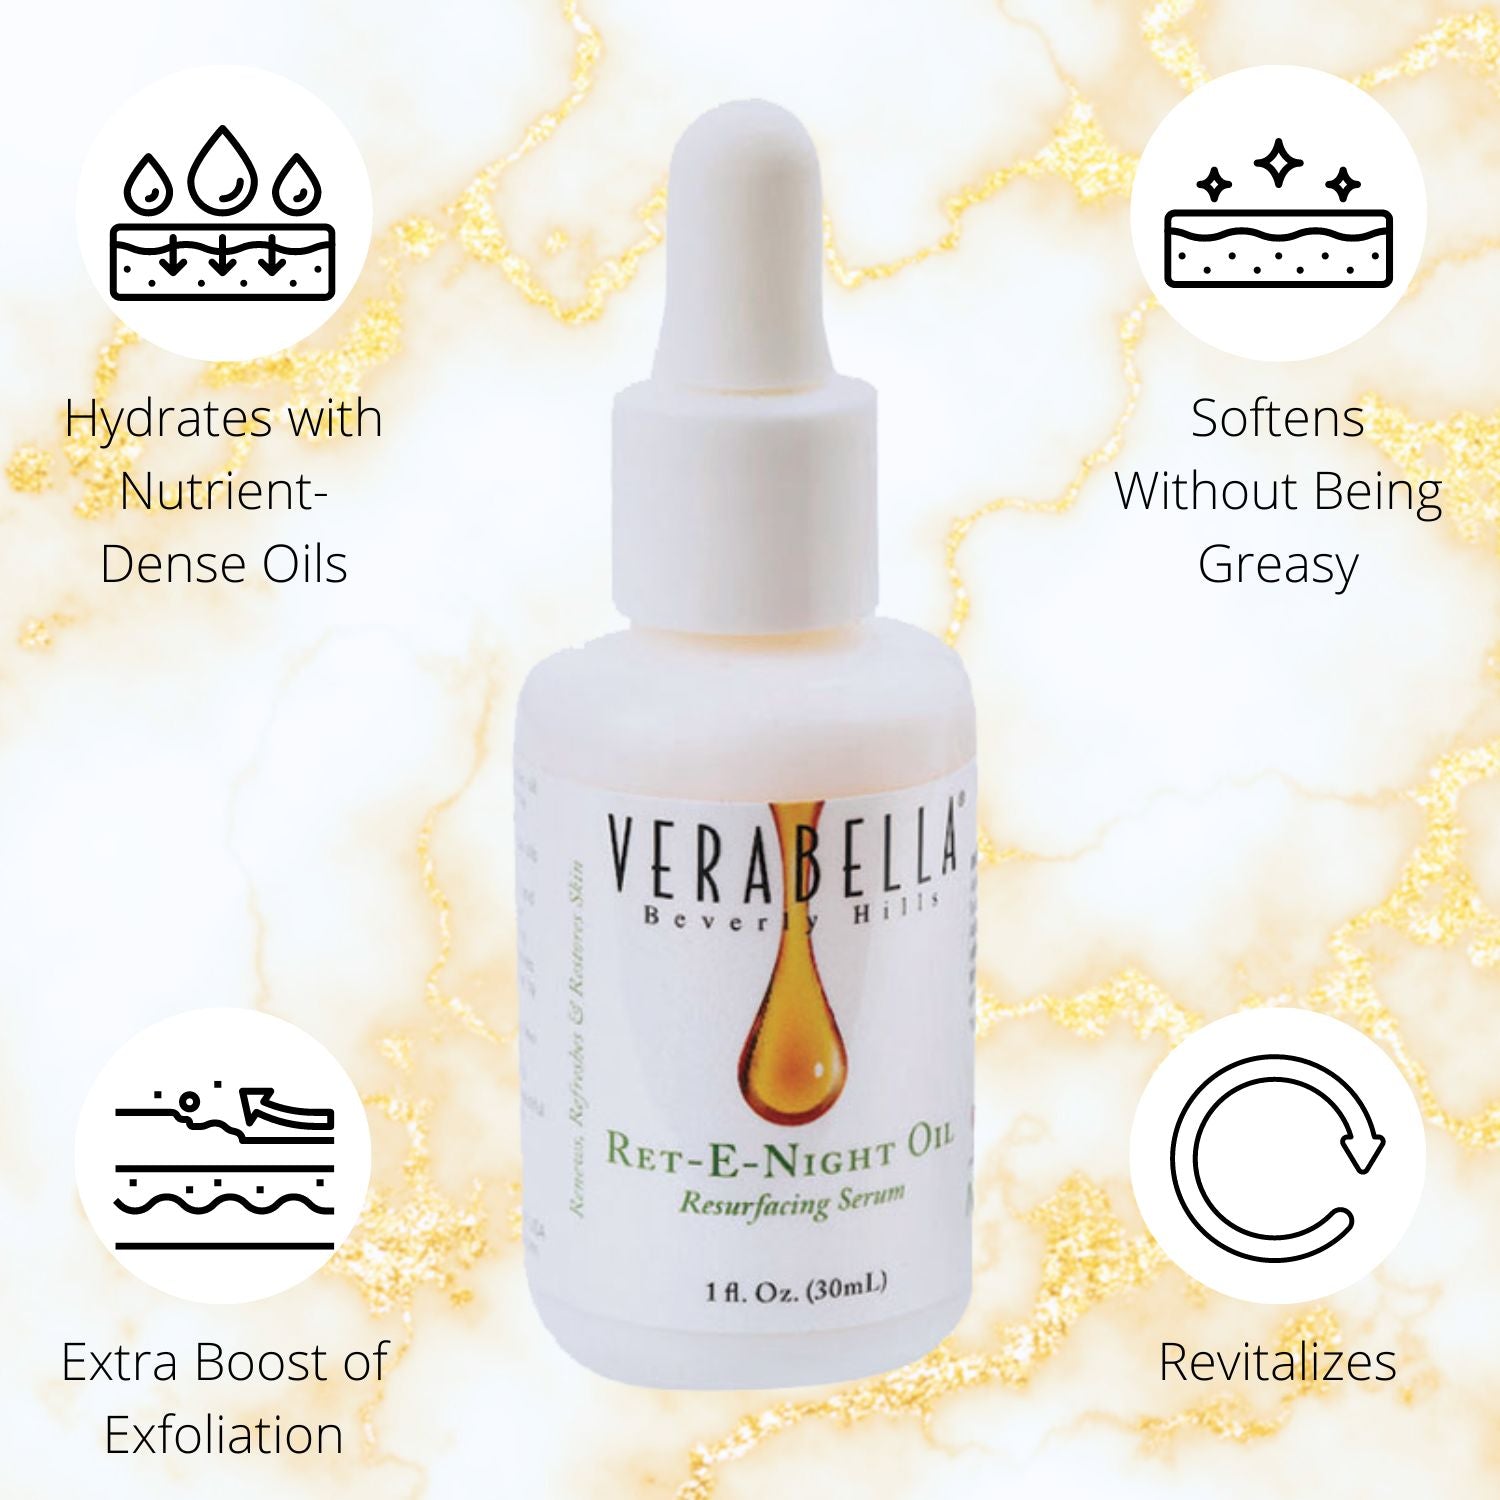 Verabella Ret-E-Night hydrates and softens without being greasy